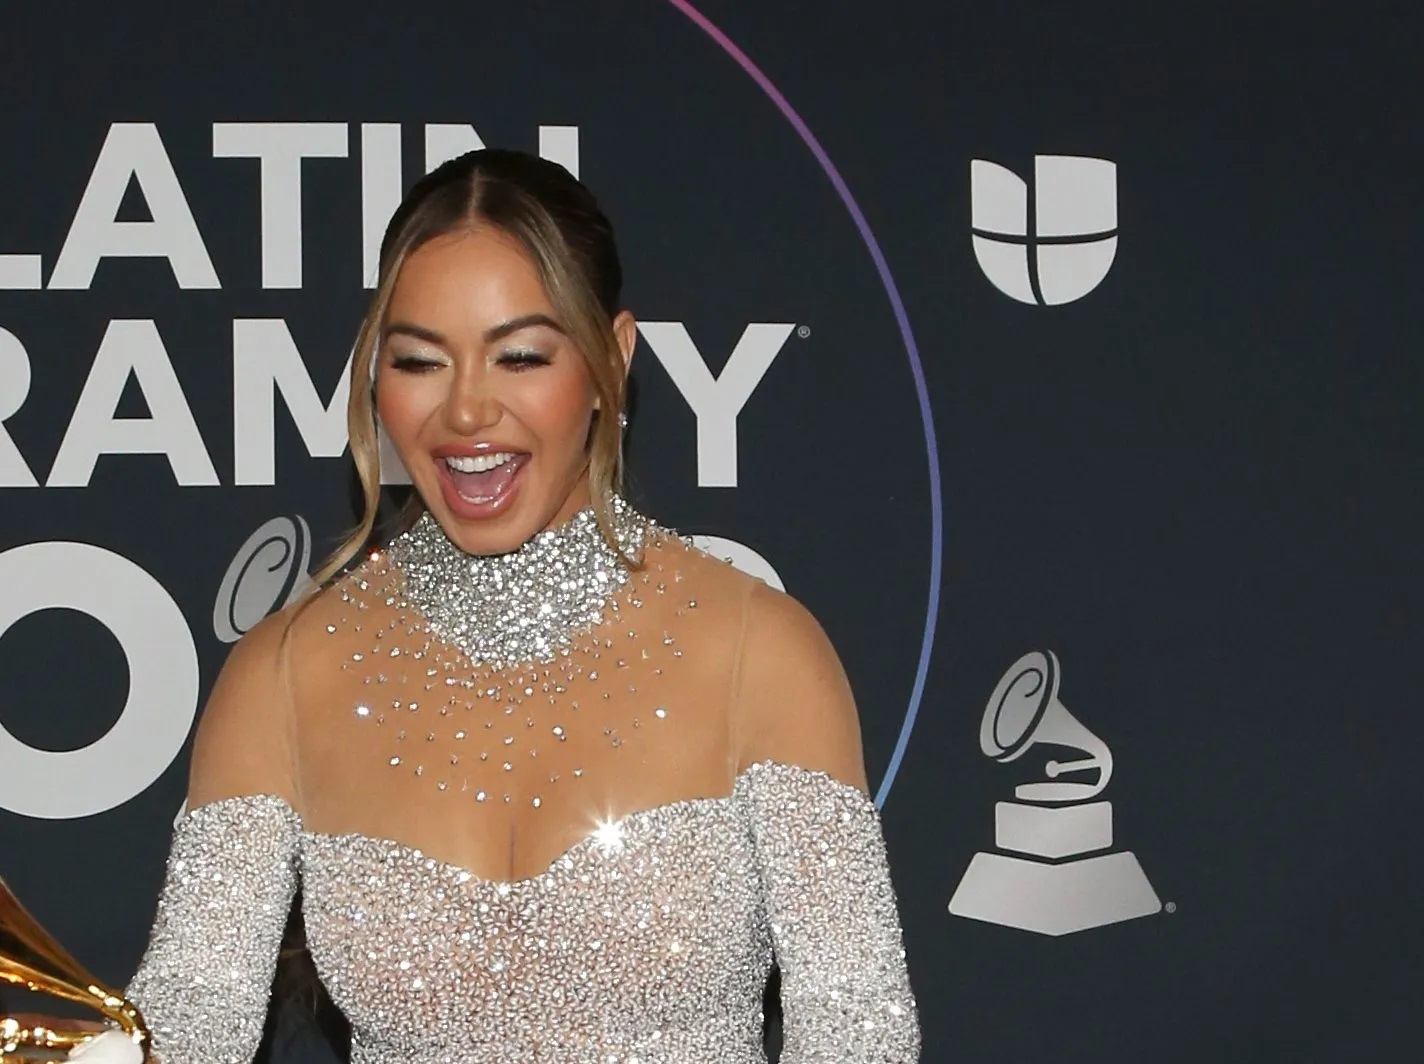 Chiquis Rivera poses in a bathing suit and boasts intense perreo with her boyfriend on Instagram